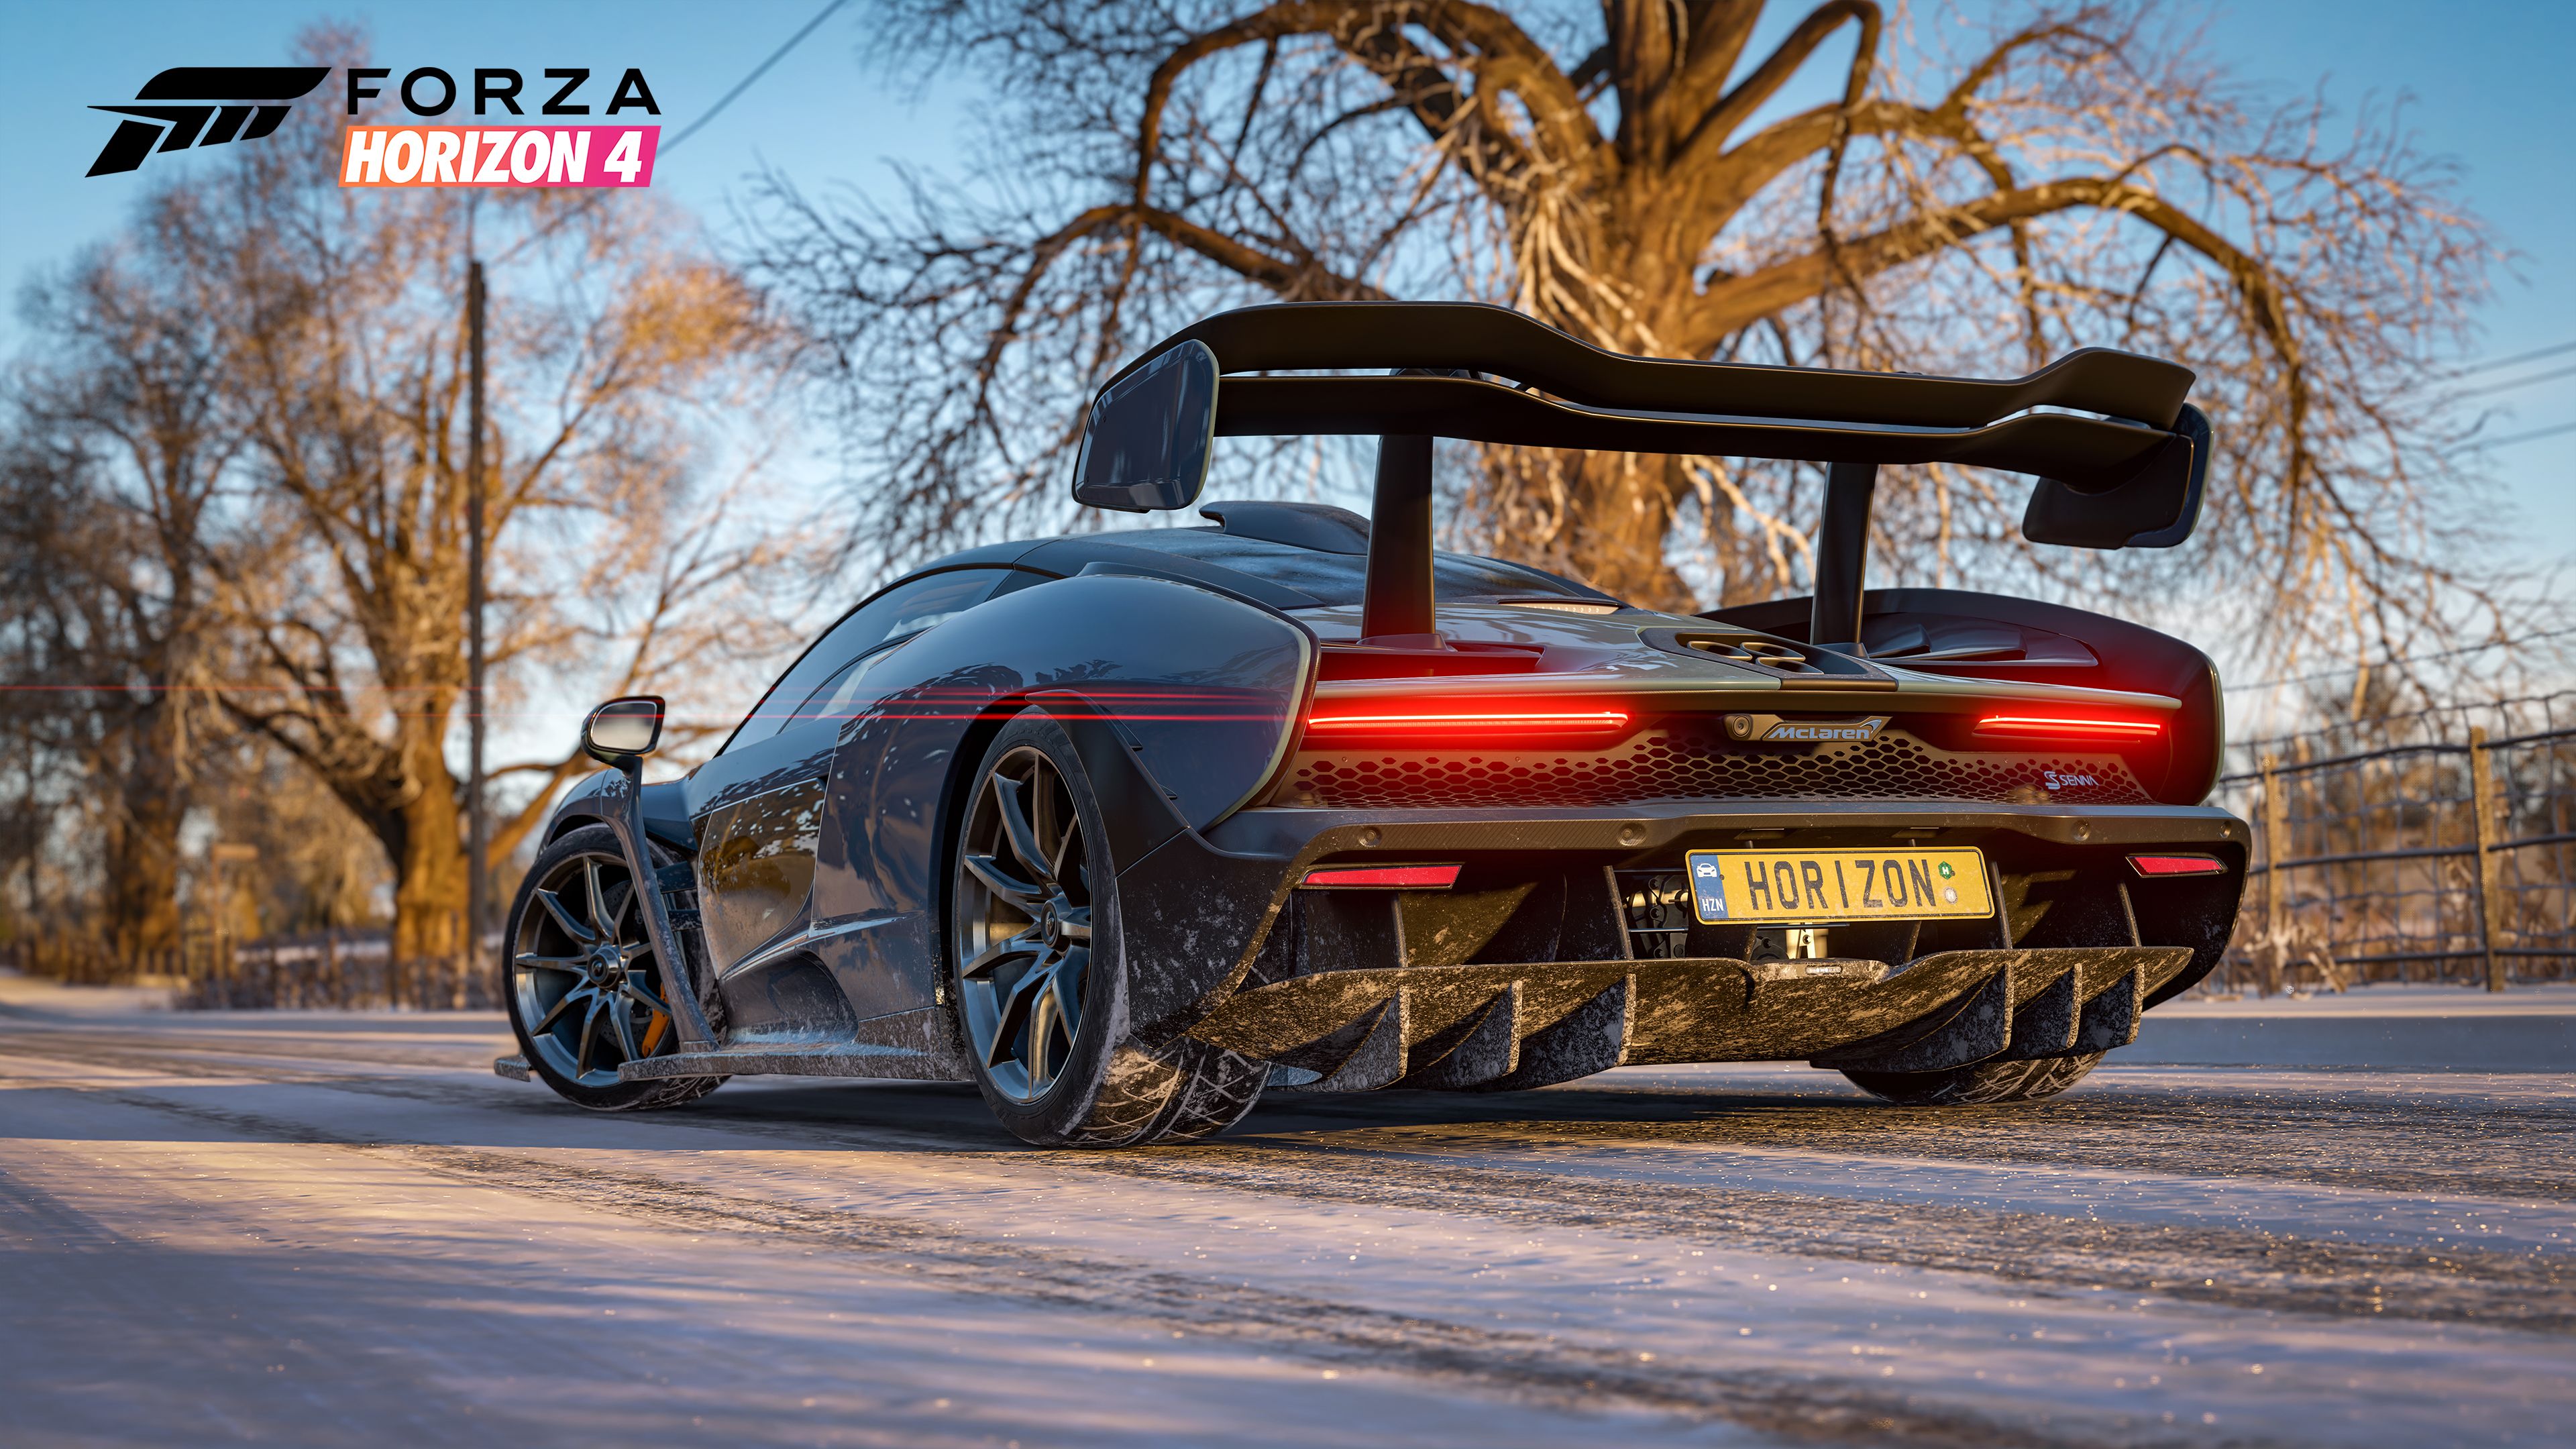 What's the difference between Forza Horizon & Forza Motorsport?